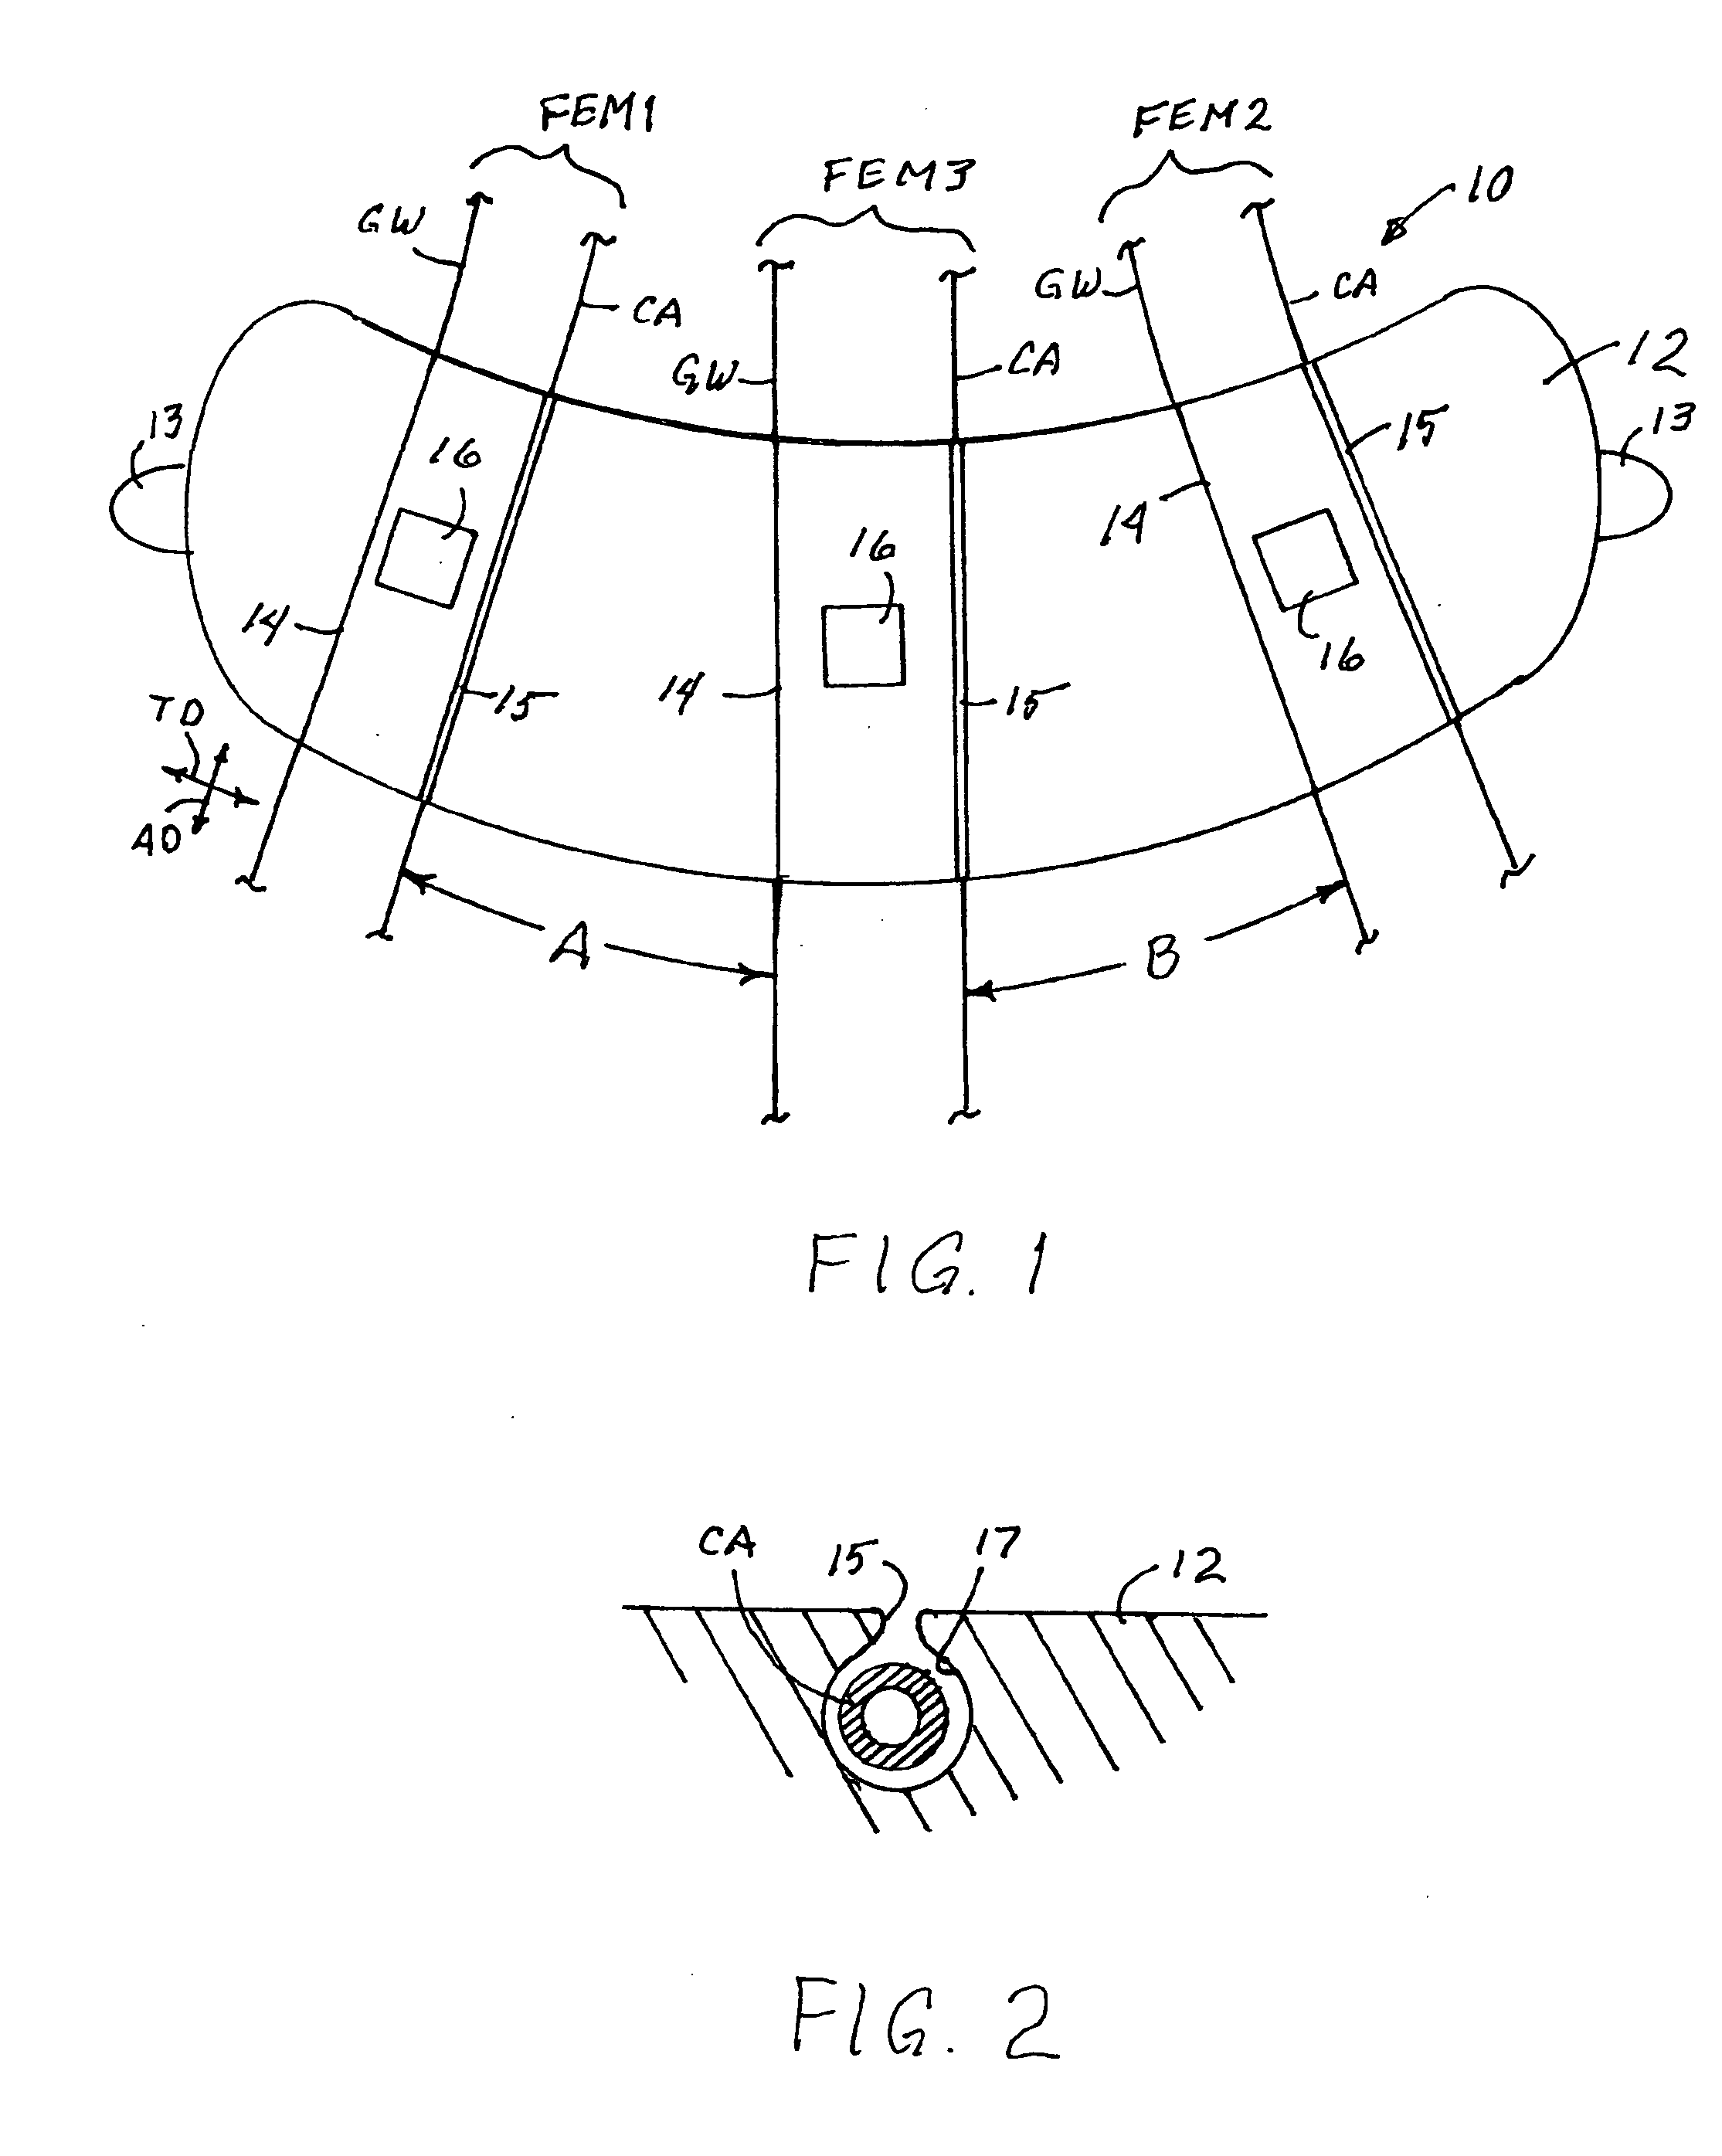 Guide wire and catheter management device